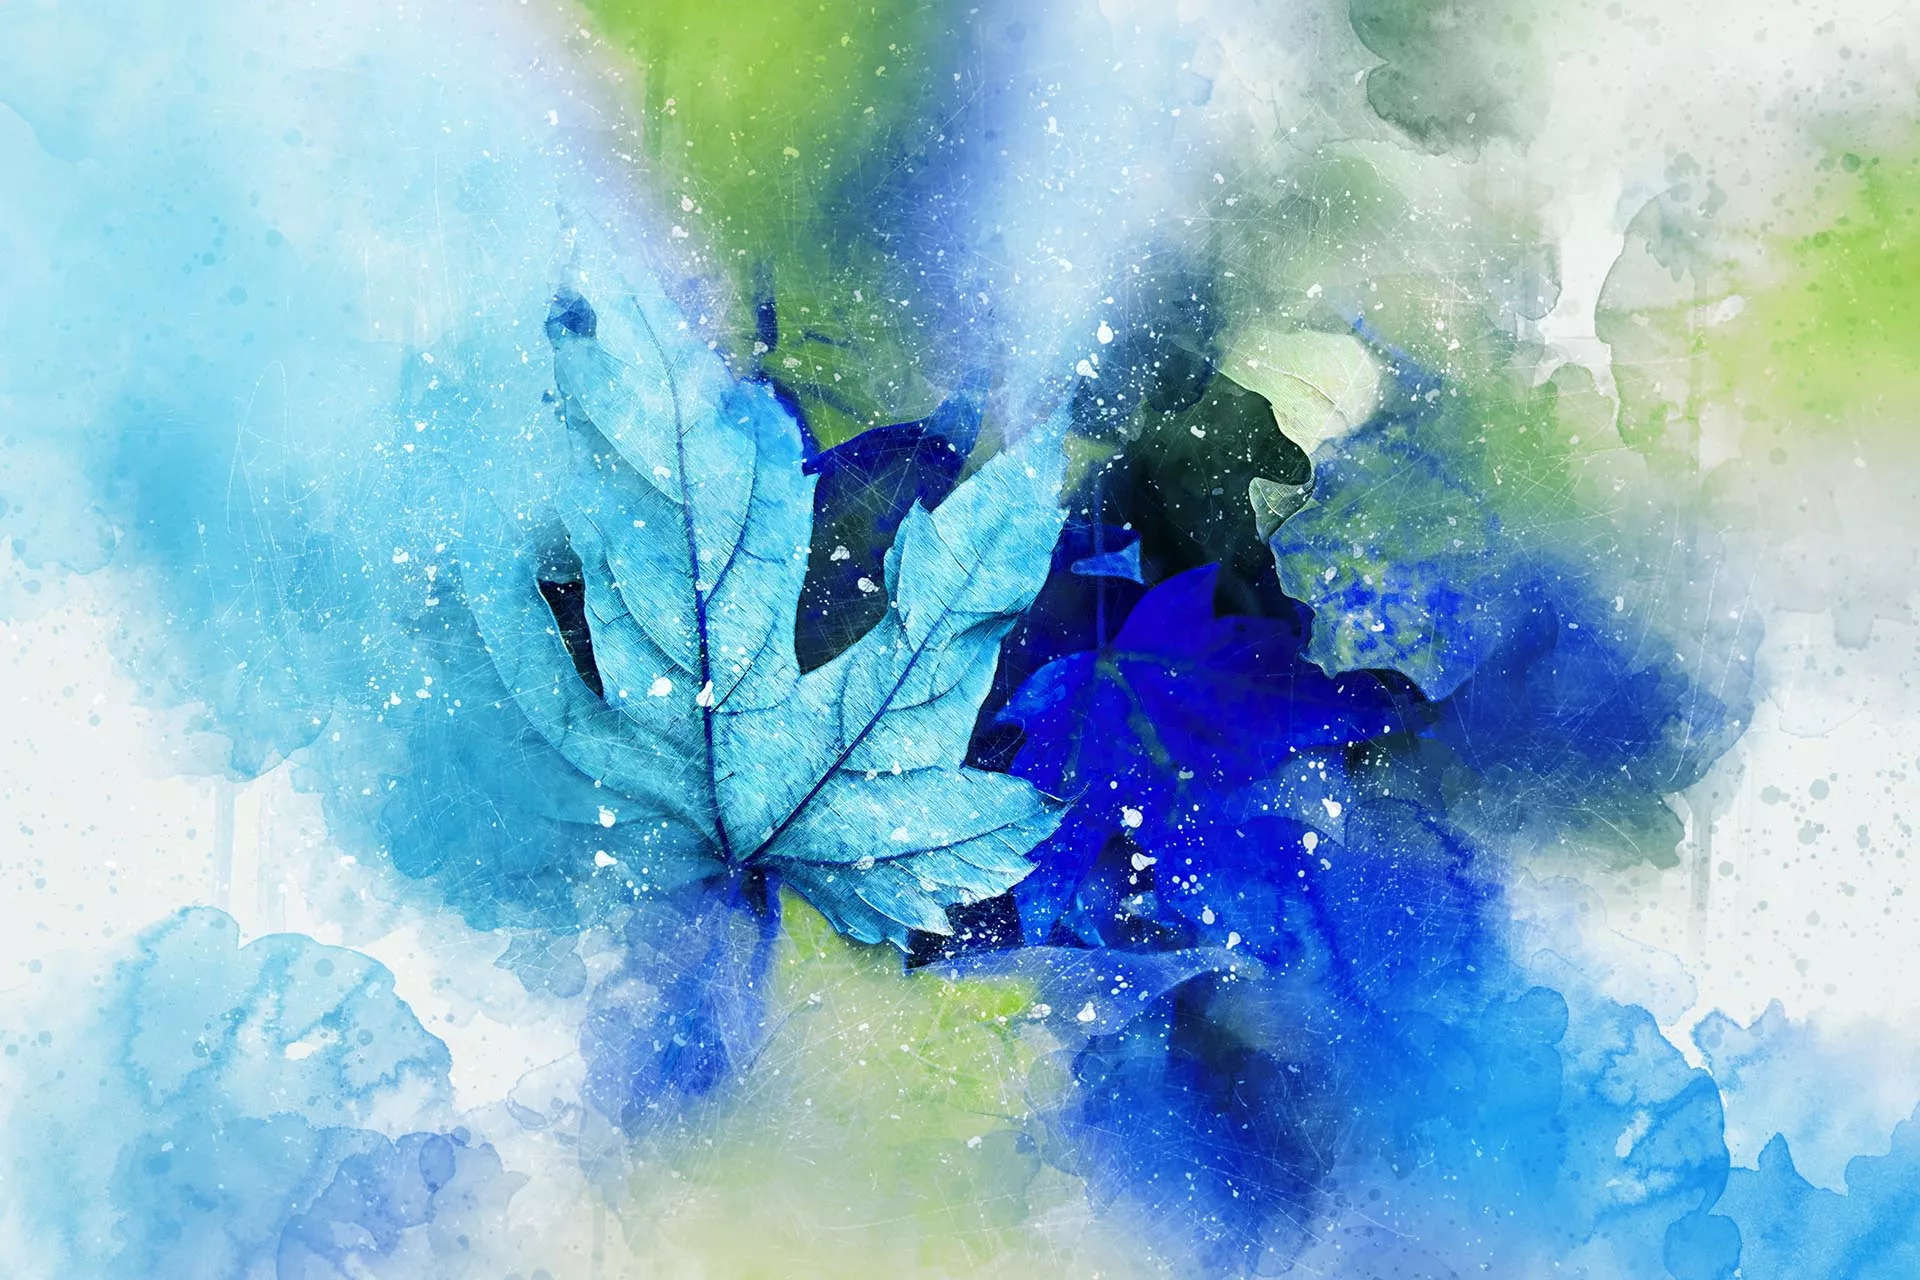 Abstract watercolor painting of blue leaves with vivid splashes of green, white, and blue hues.